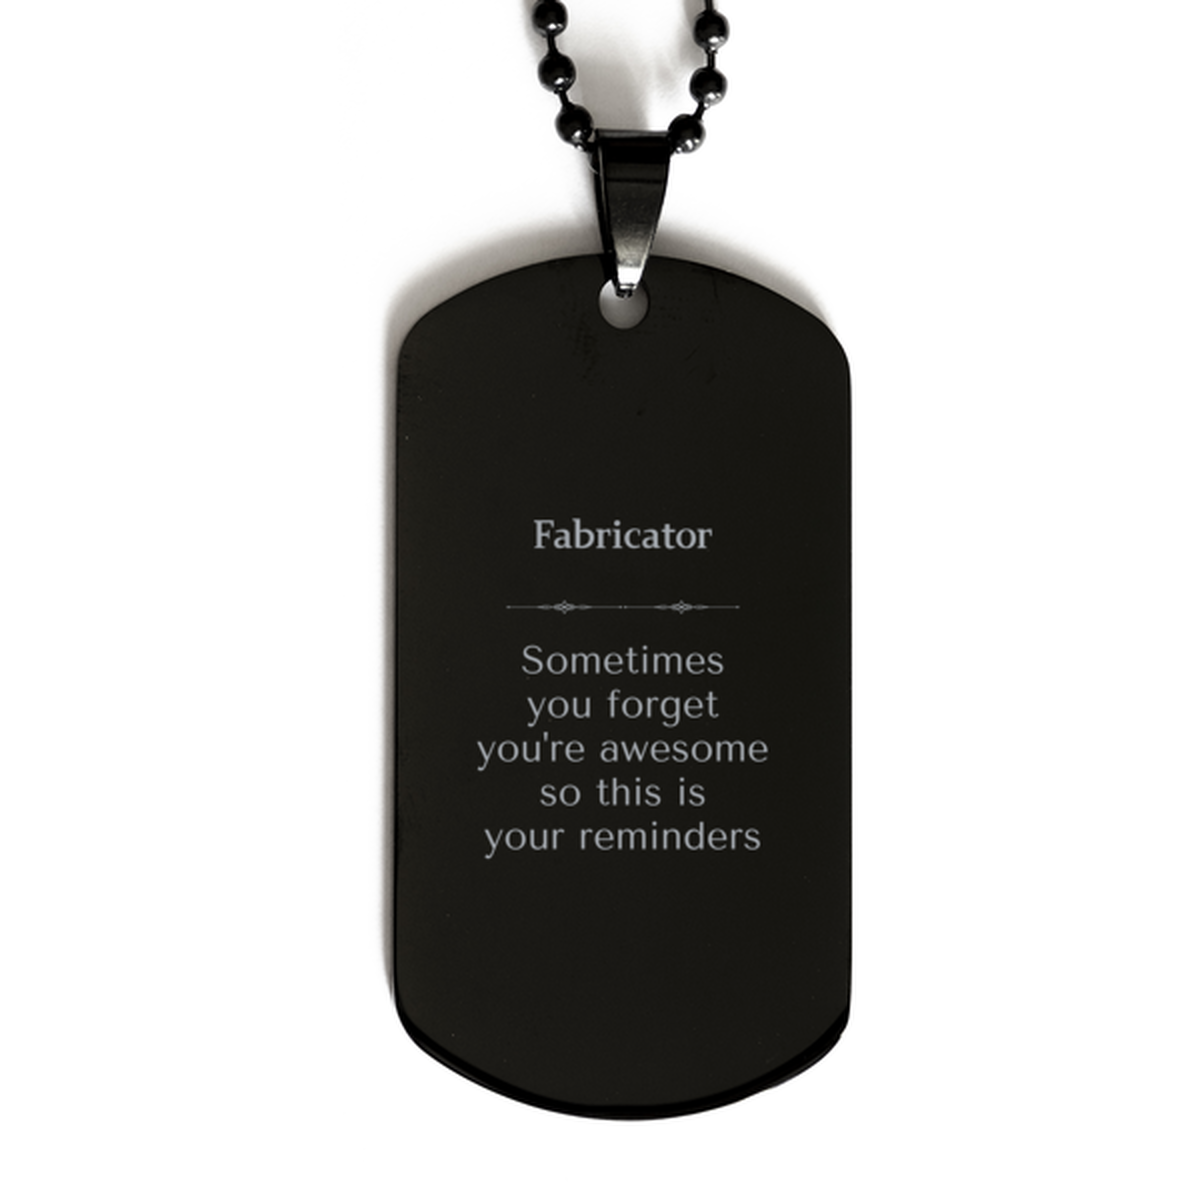 Sentimental Fabricator Black Dog Tag, Fabricator Sometimes you forget you're awesome so this is your reminders, Graduation Christmas Birthday Gifts for Fabricator, Men, Women, Coworkers